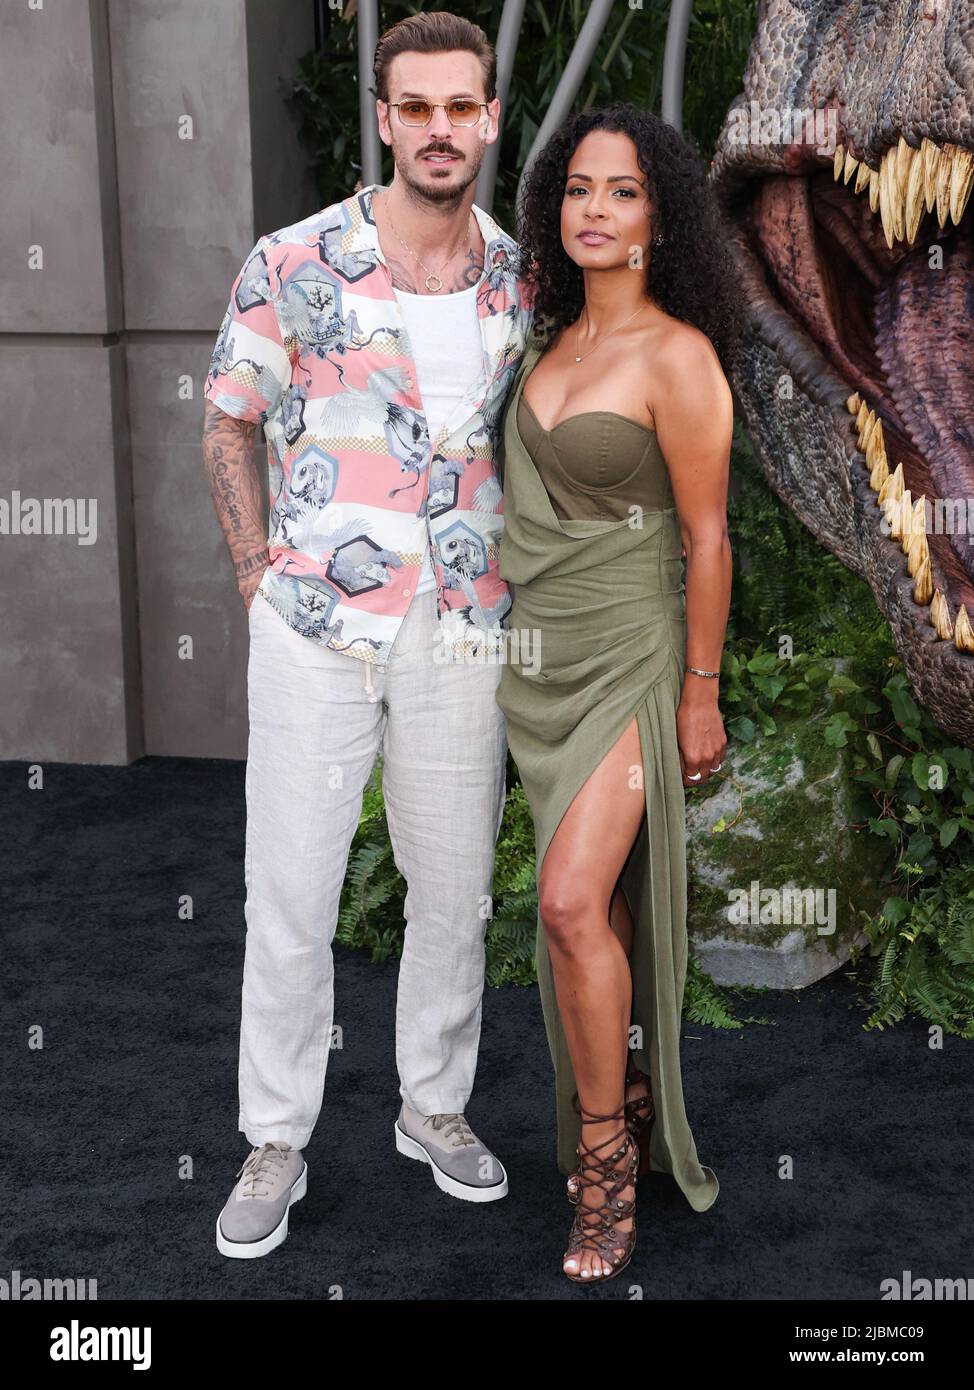 Hollywood, United States. 06th June, 2022. HOLLYWOOD, LOS ANGELES, CALIFORNIA, USA - JUNE 06: French singer Matt Pokora and wife/American actress Christina Milian arrive at the Los Angeles Premiere Of Universal Pictures' 'Jurassic World Dominion' held at the TCL Chinese Theatre IMAX on June 6, 2022 in Hollywood, Los Angeles, California, United States. (Photo by Xavier Collin/Image Press Agency) Credit: Image Press Agency/Alamy Live News Stock Photo